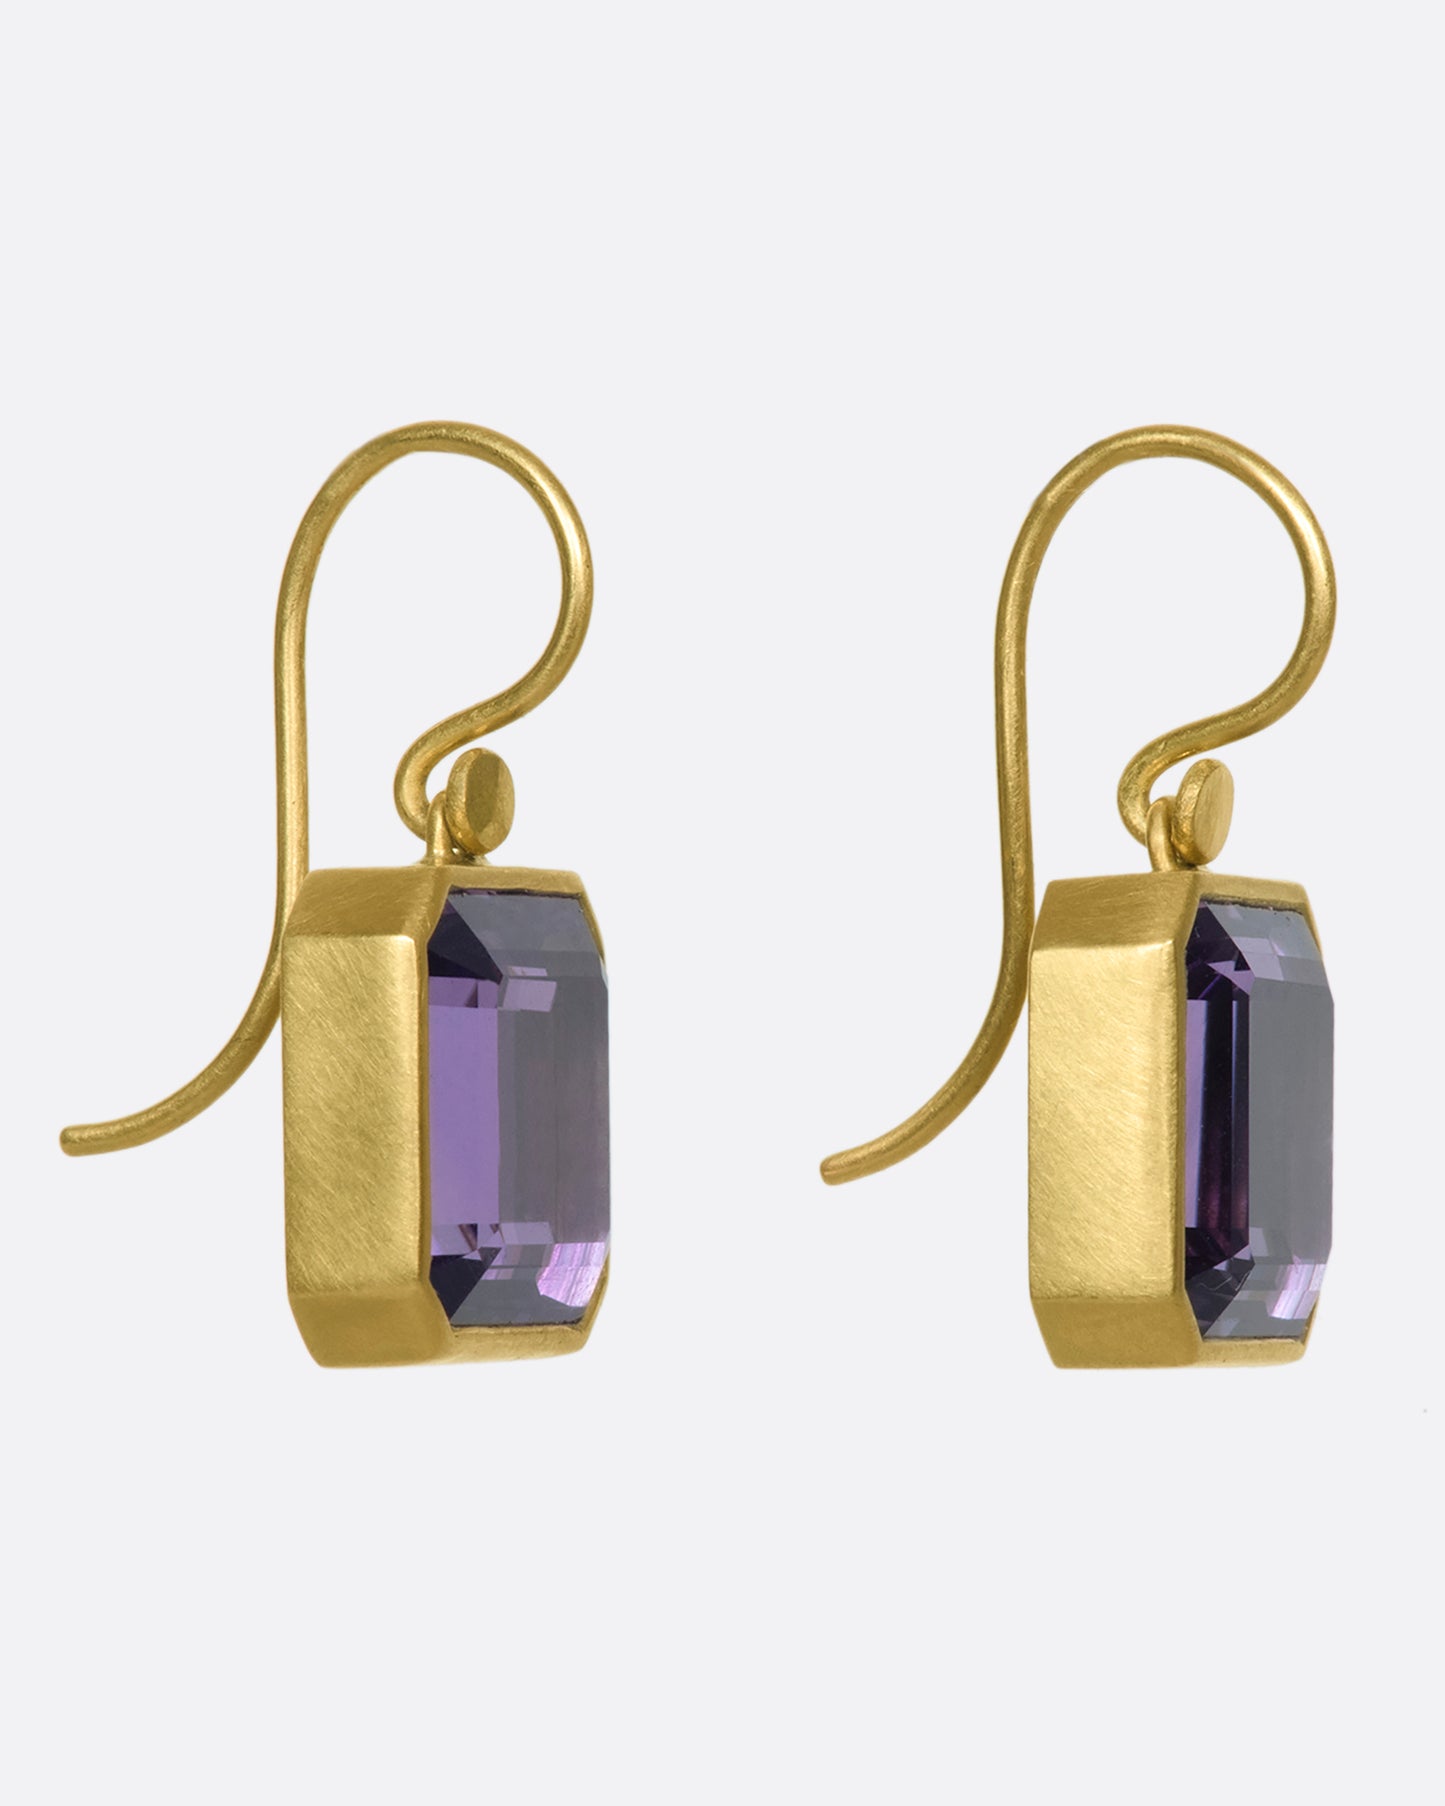 A pair of 18k gold drops with amethyst cubes. The octagonal shape adds extra dimension to the deep purple stone, making it change colors when viewed from different angles.